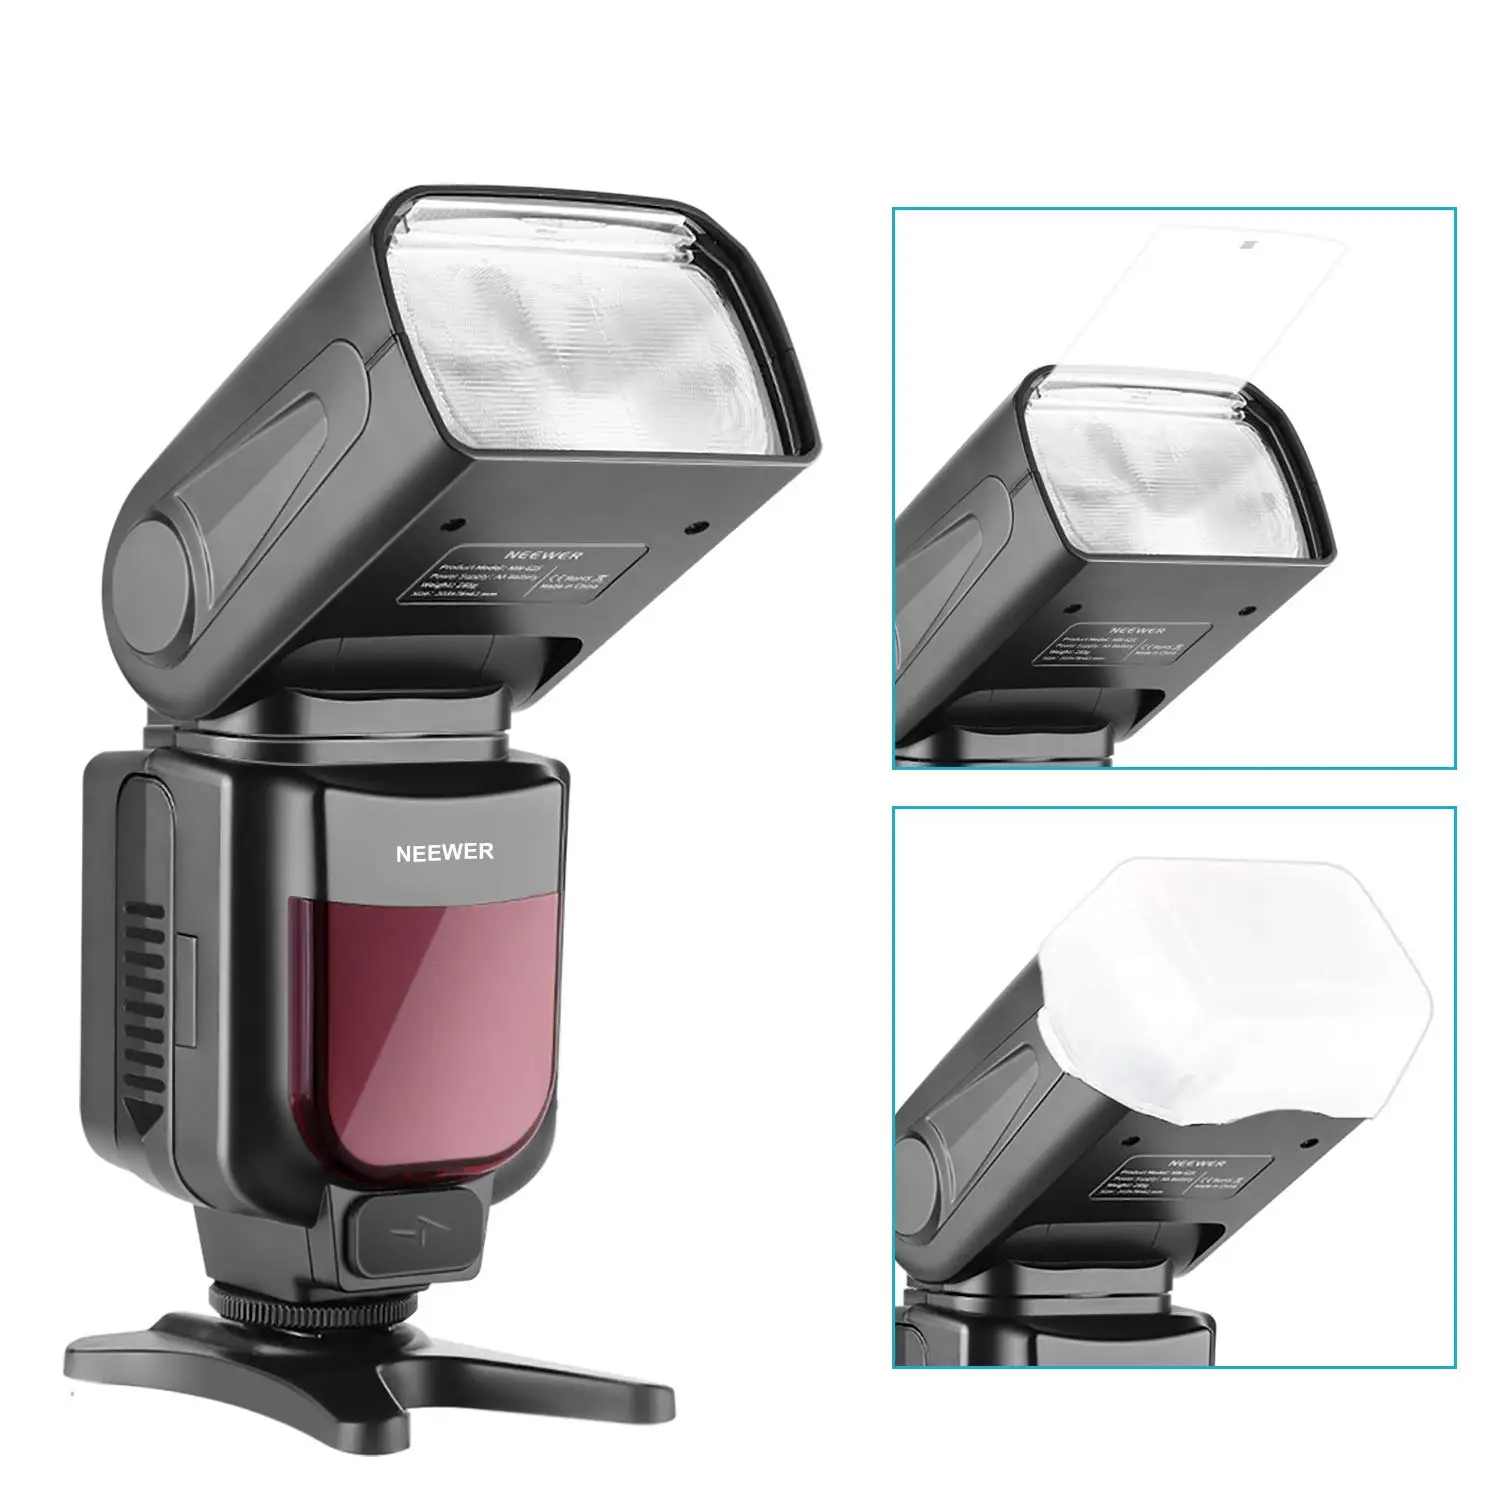 Neewer NW-625 GN54 Speedlite Flash for Canon Nikon Panasonic Olympus Pentax Fijifilm DSLRs and Mirrorless Cameras and Sony a9 a7